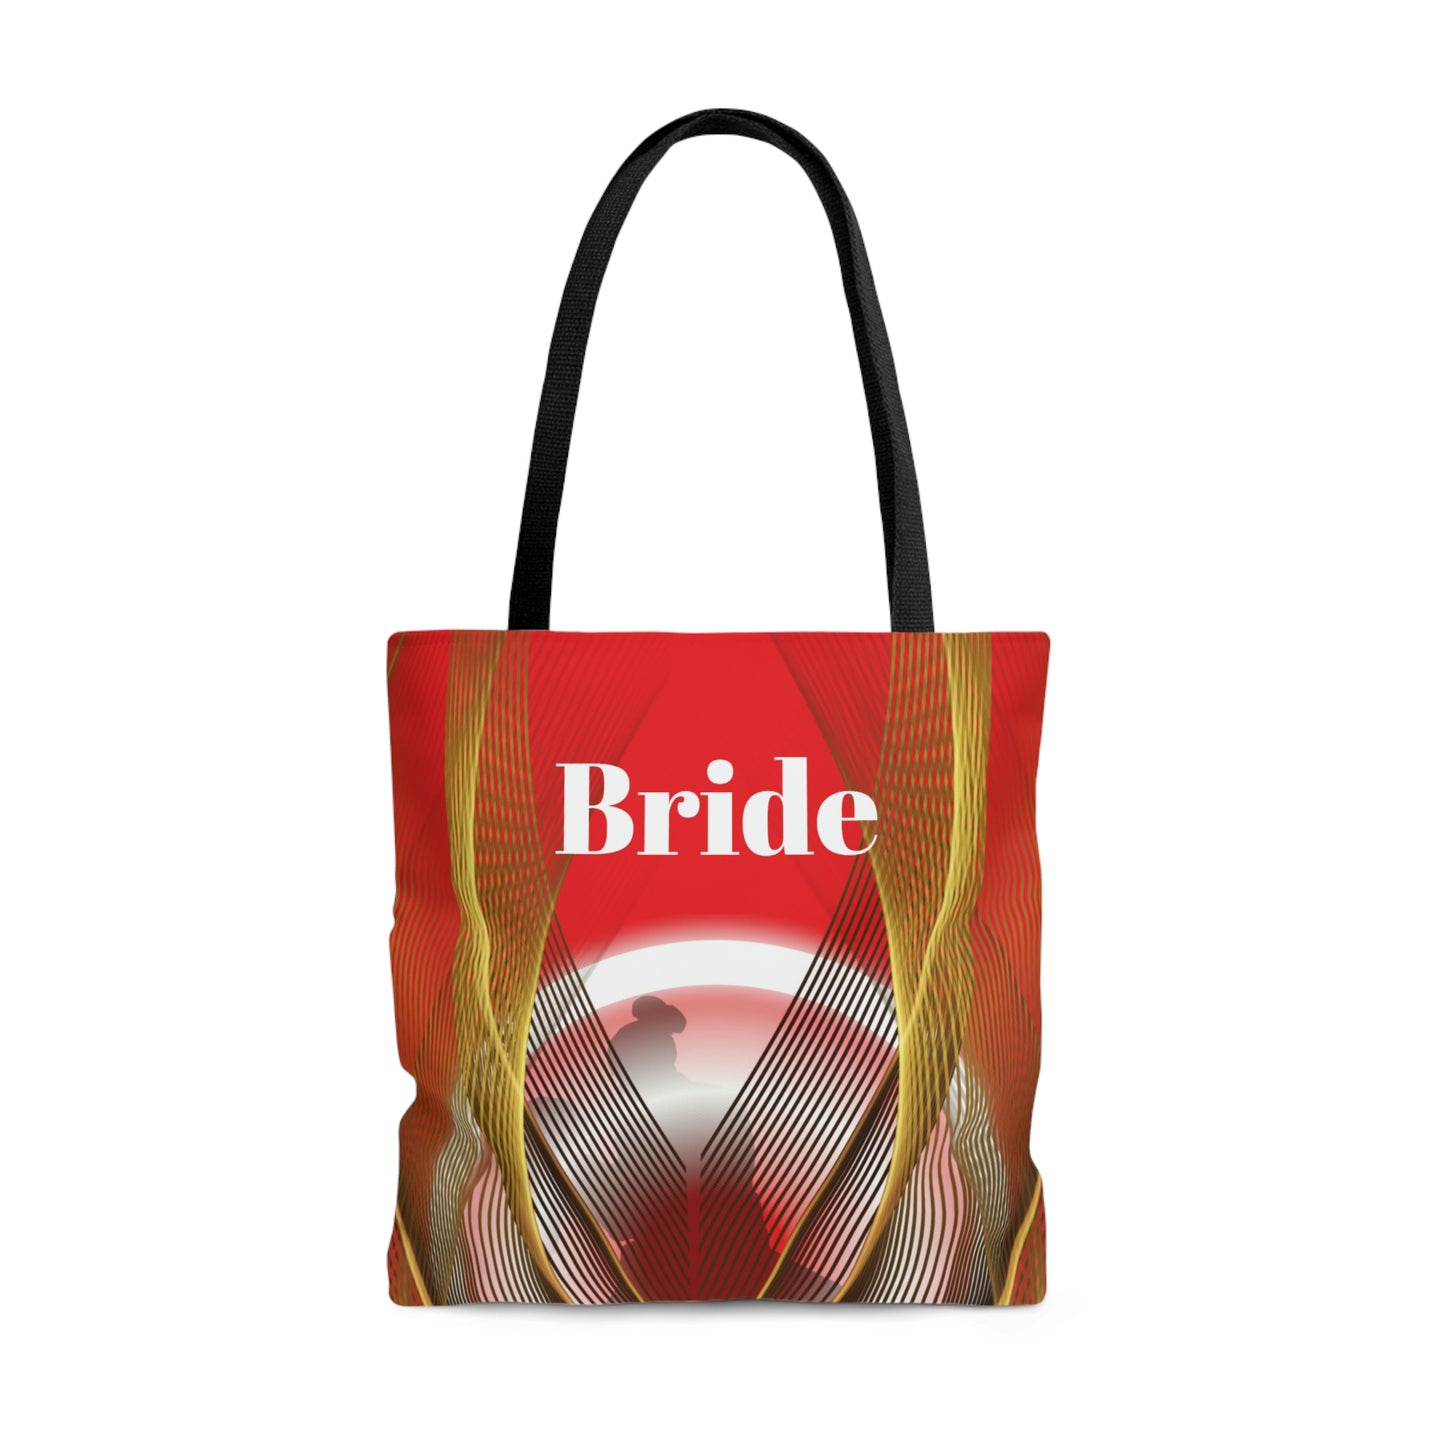 Red Bride Tote | Bridal Shower Gift |  Personalized Wedding Bag | Bride to Be | Wedding Gift For Her